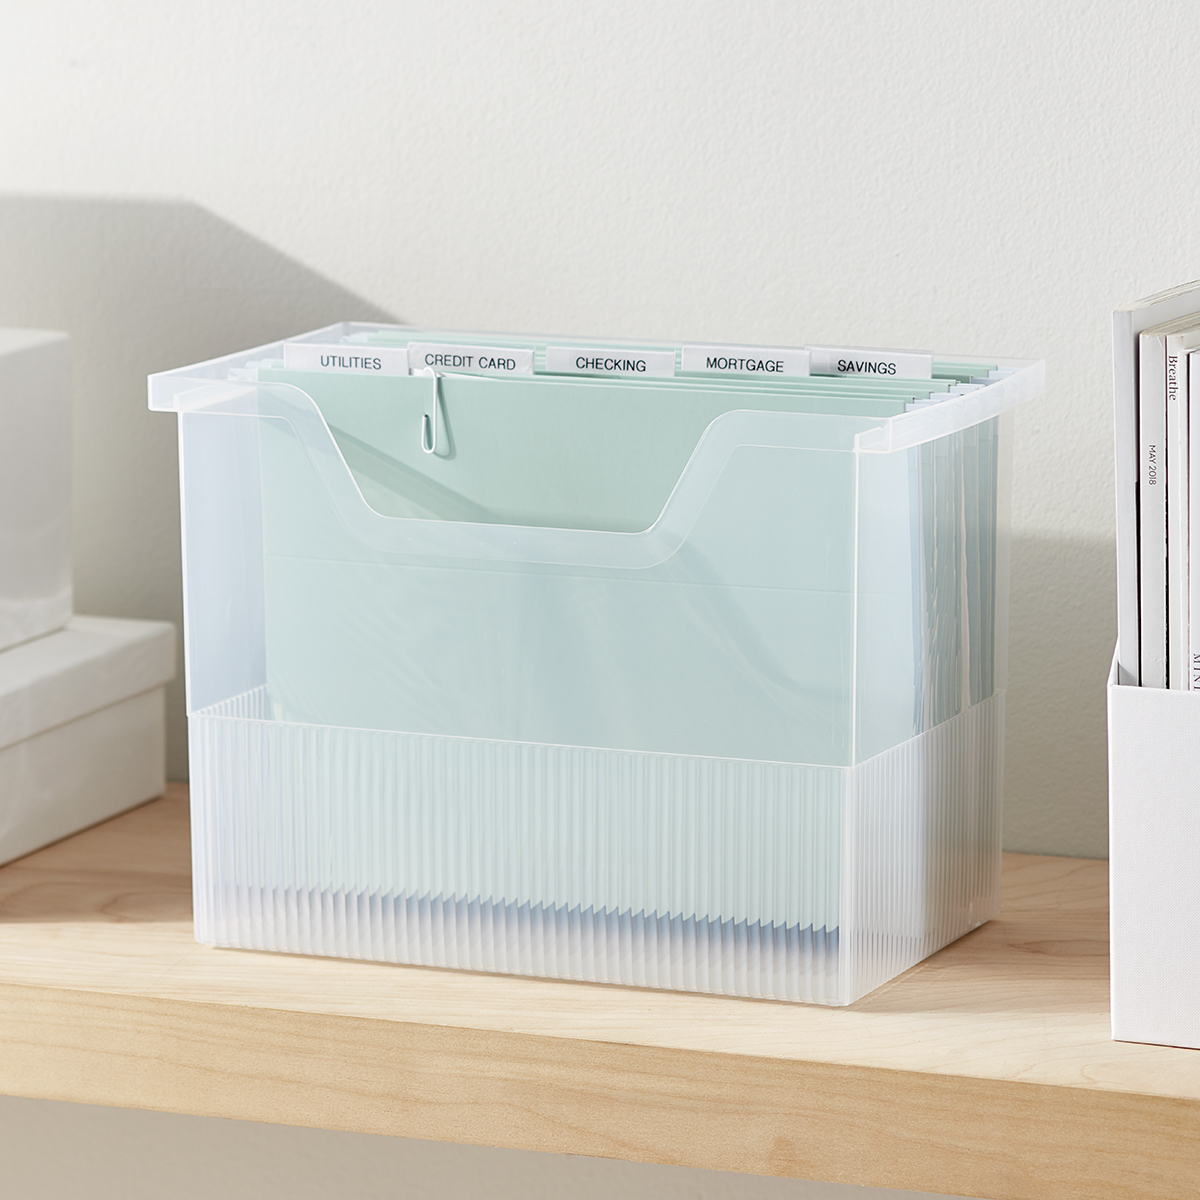 Clear Open-Top File Storage Boxes